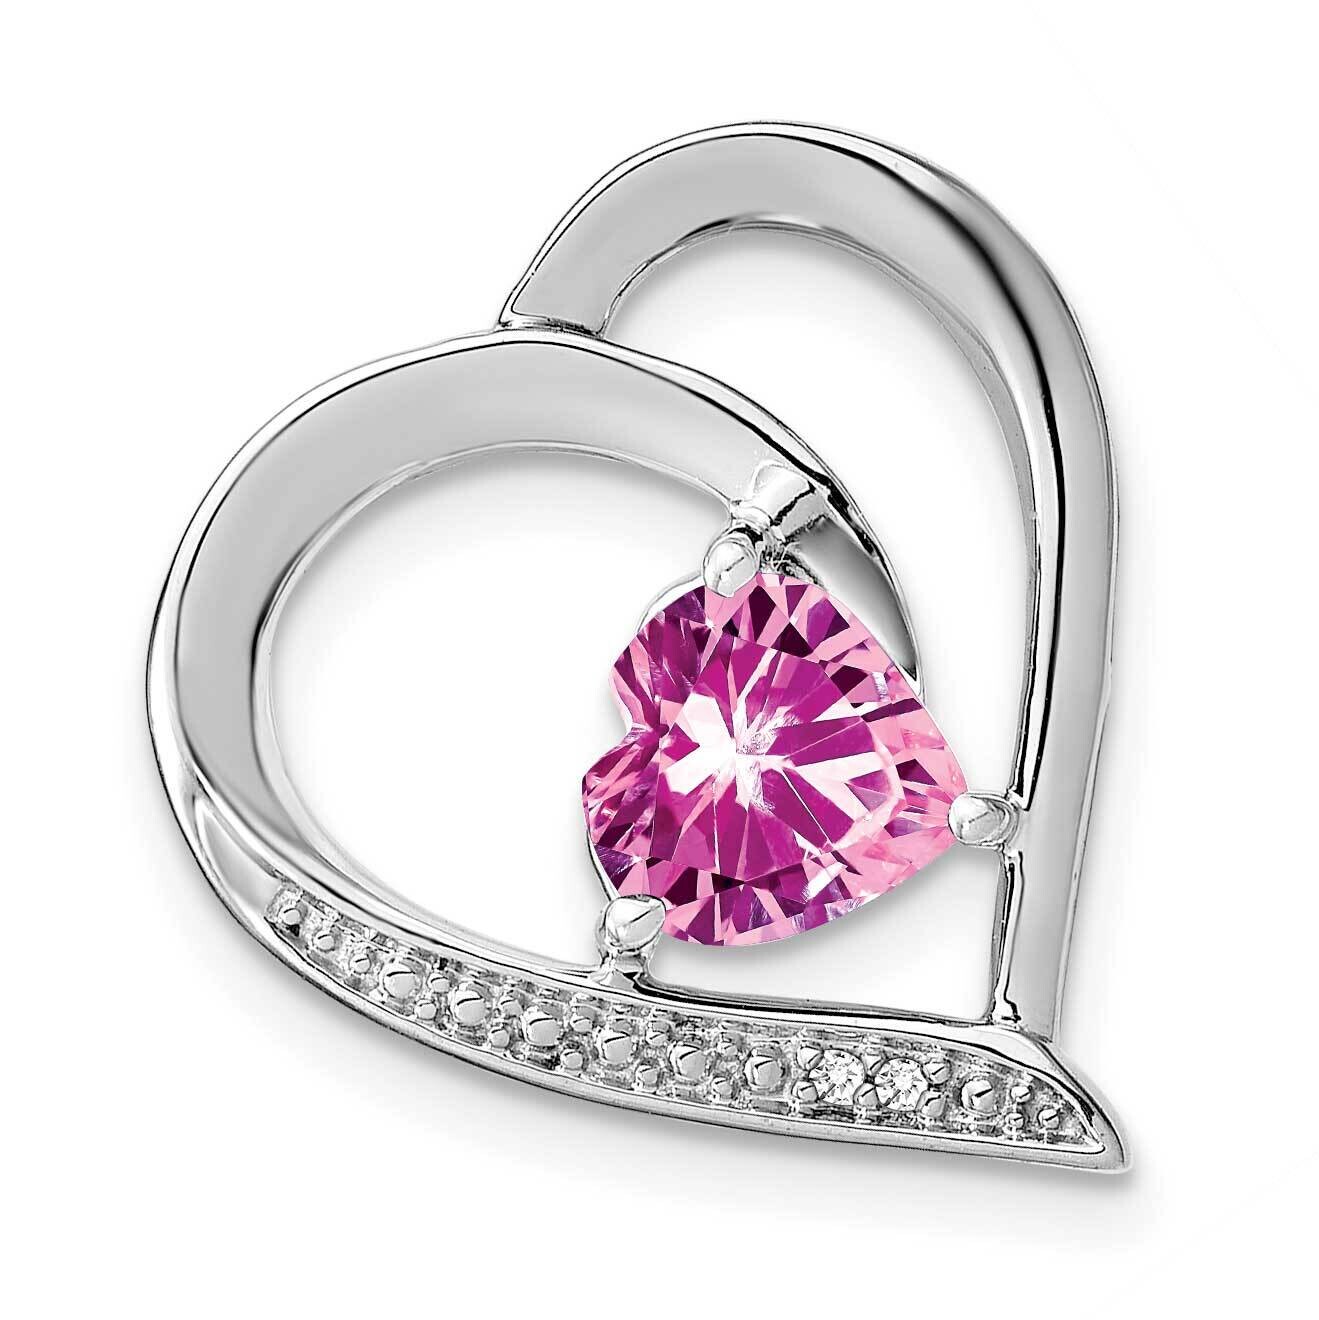 Rhod-Plated Created Pink Sapphire/Diamond Pendant Sterling Silver PM4441-CPS-001-SSA